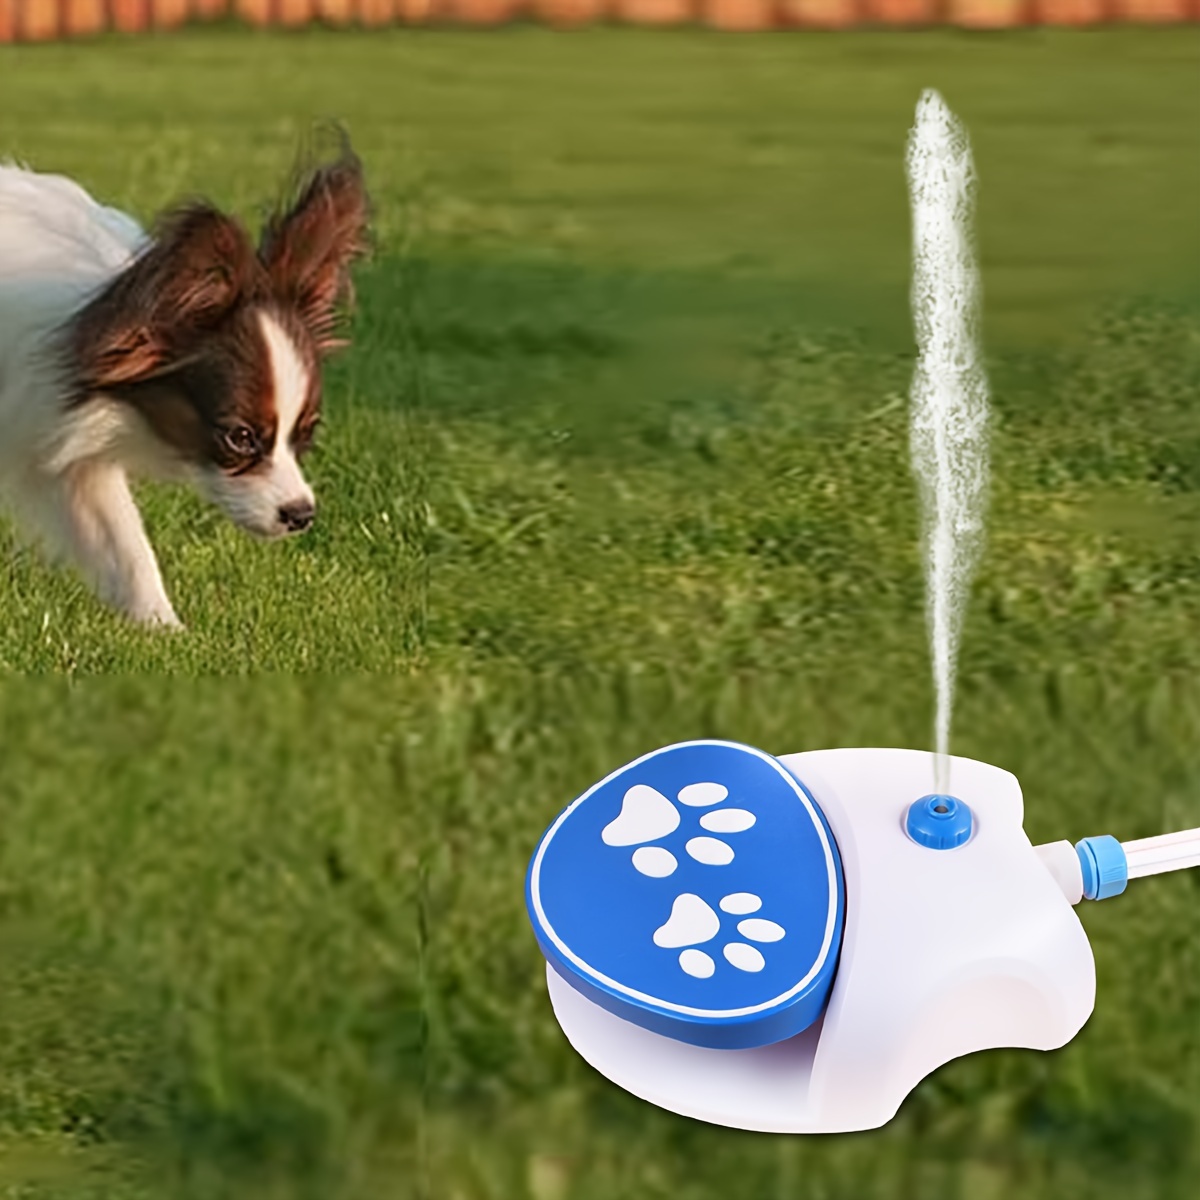 

Dog Water Fountain Sprayer With Hose - Paw Start Automatic Outdoor Dog Drinking Station, Easy-to-use Fresh Water Dispenser For Dogs, No Battery Required, Plastic Material